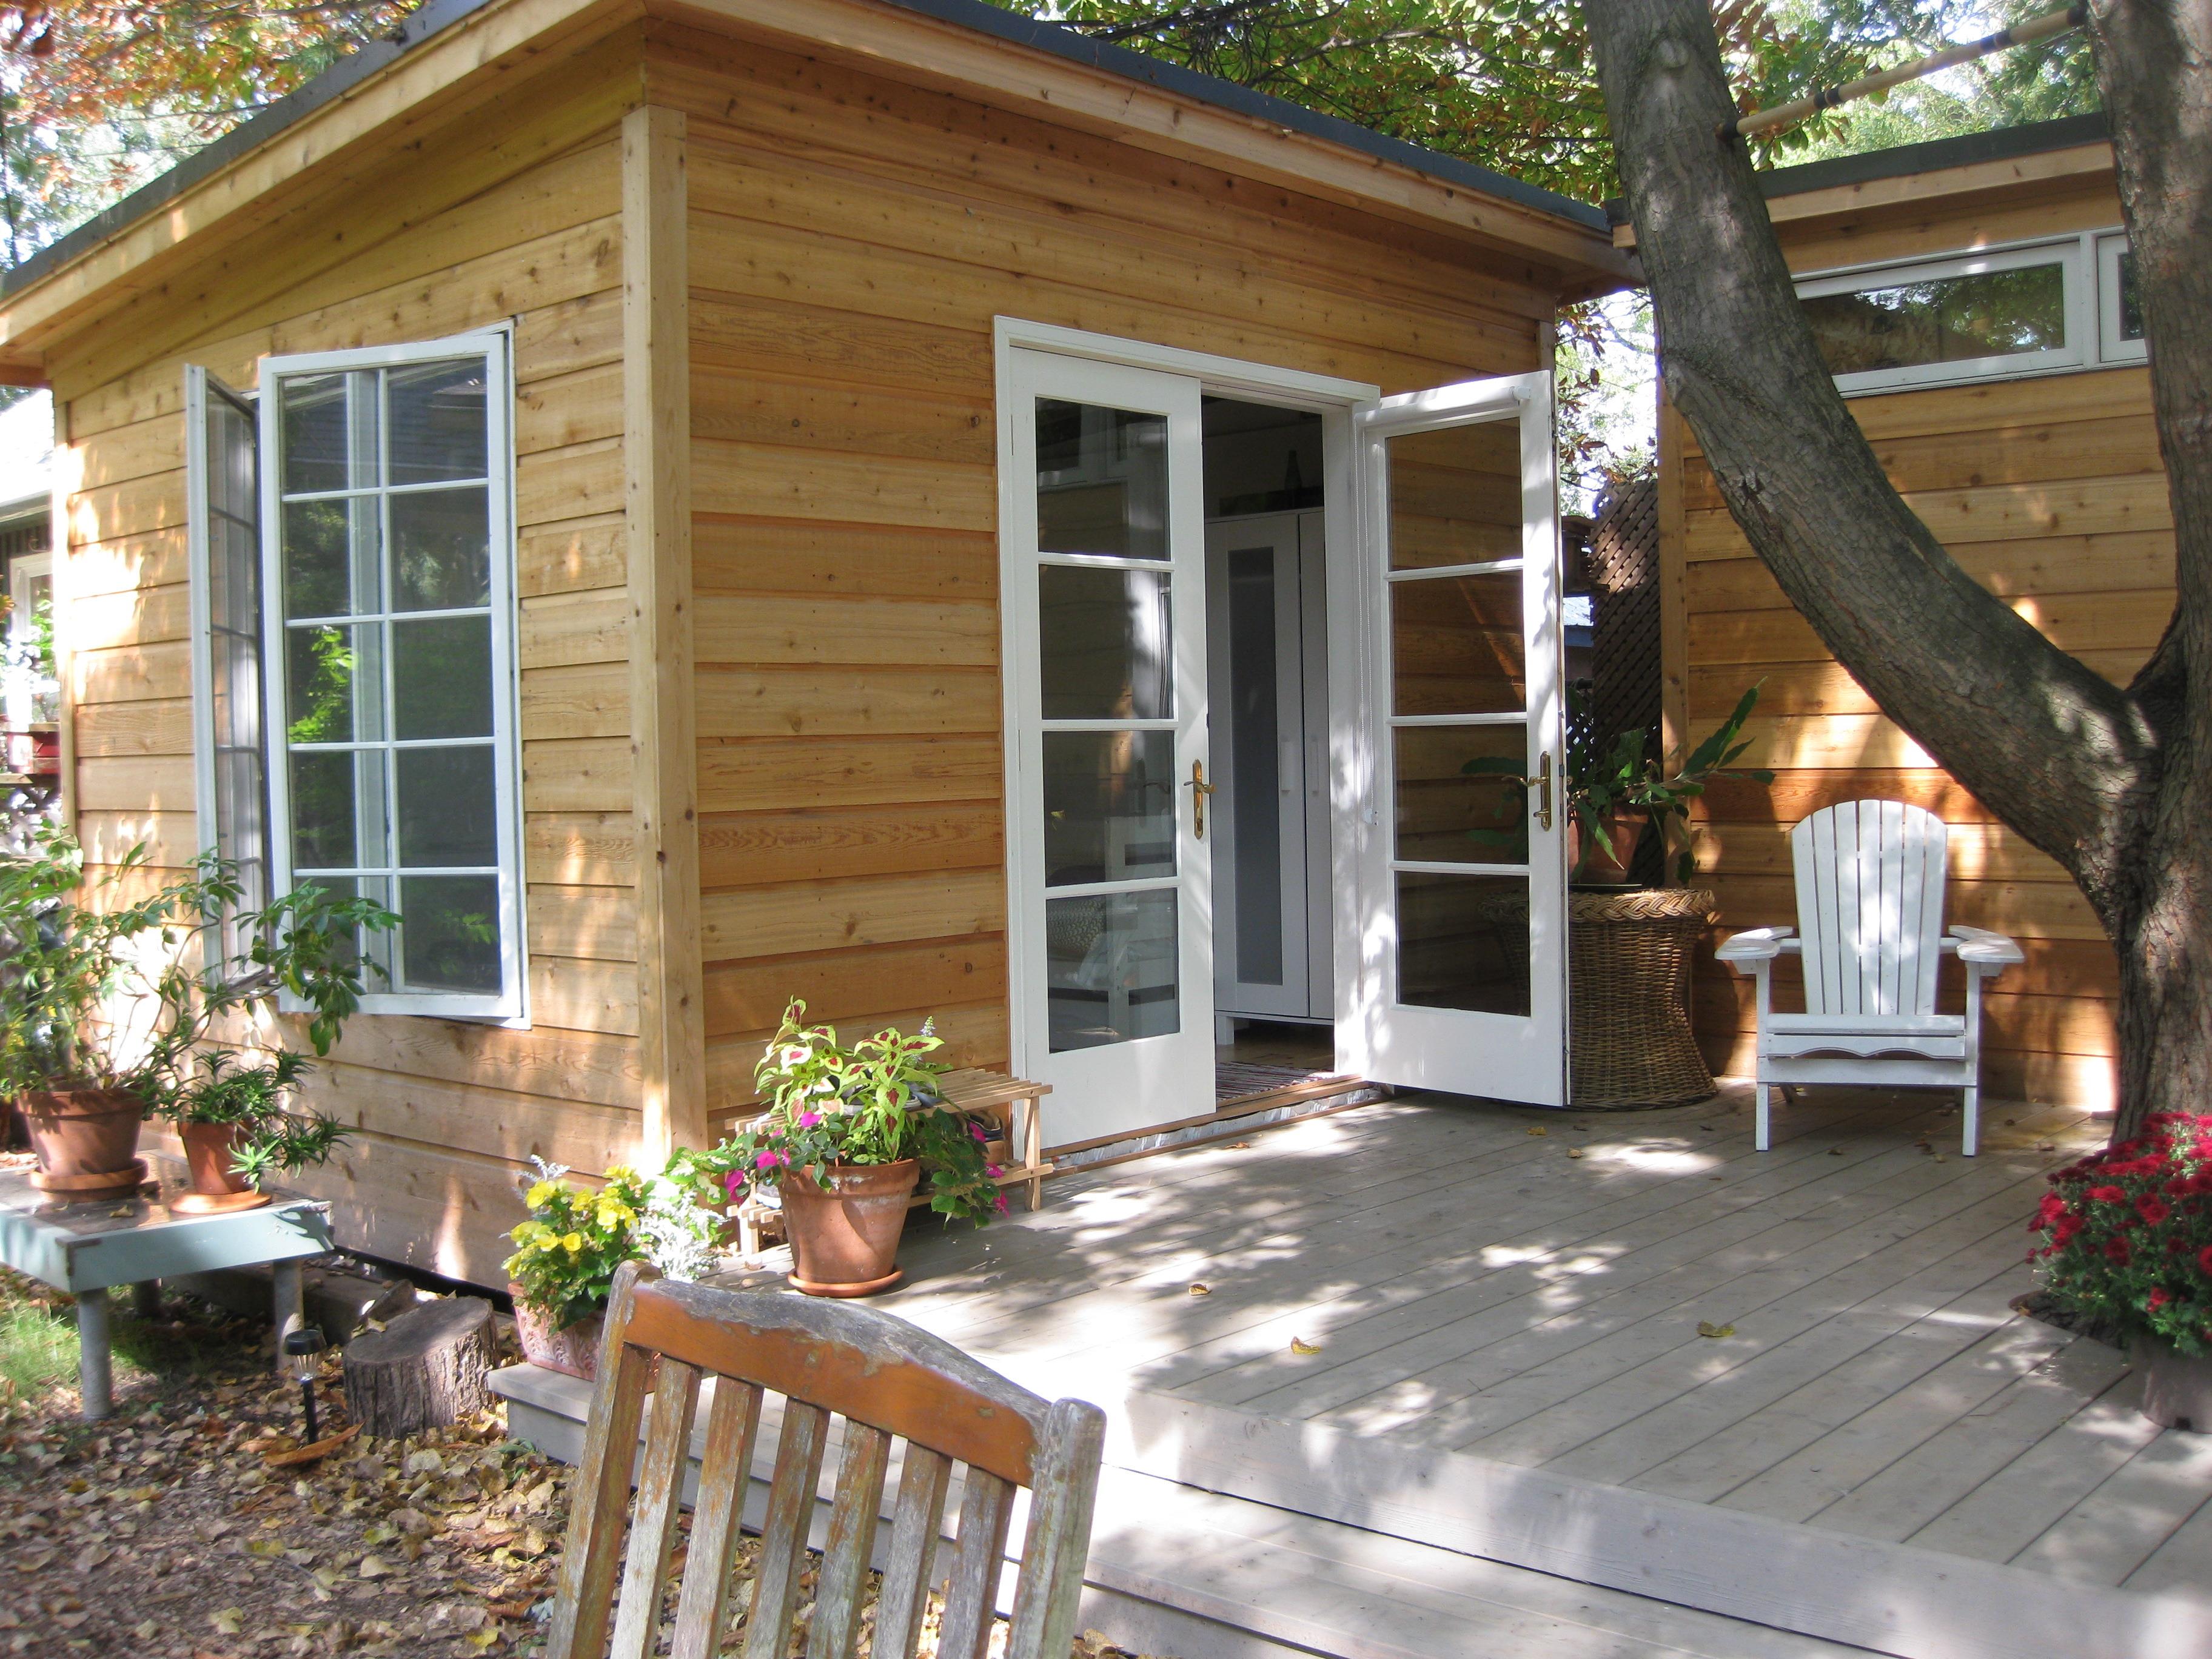 Cedar Urban Studio Shed 10x12 with French double doors in Toronto, Ontario. ID number 135597-2